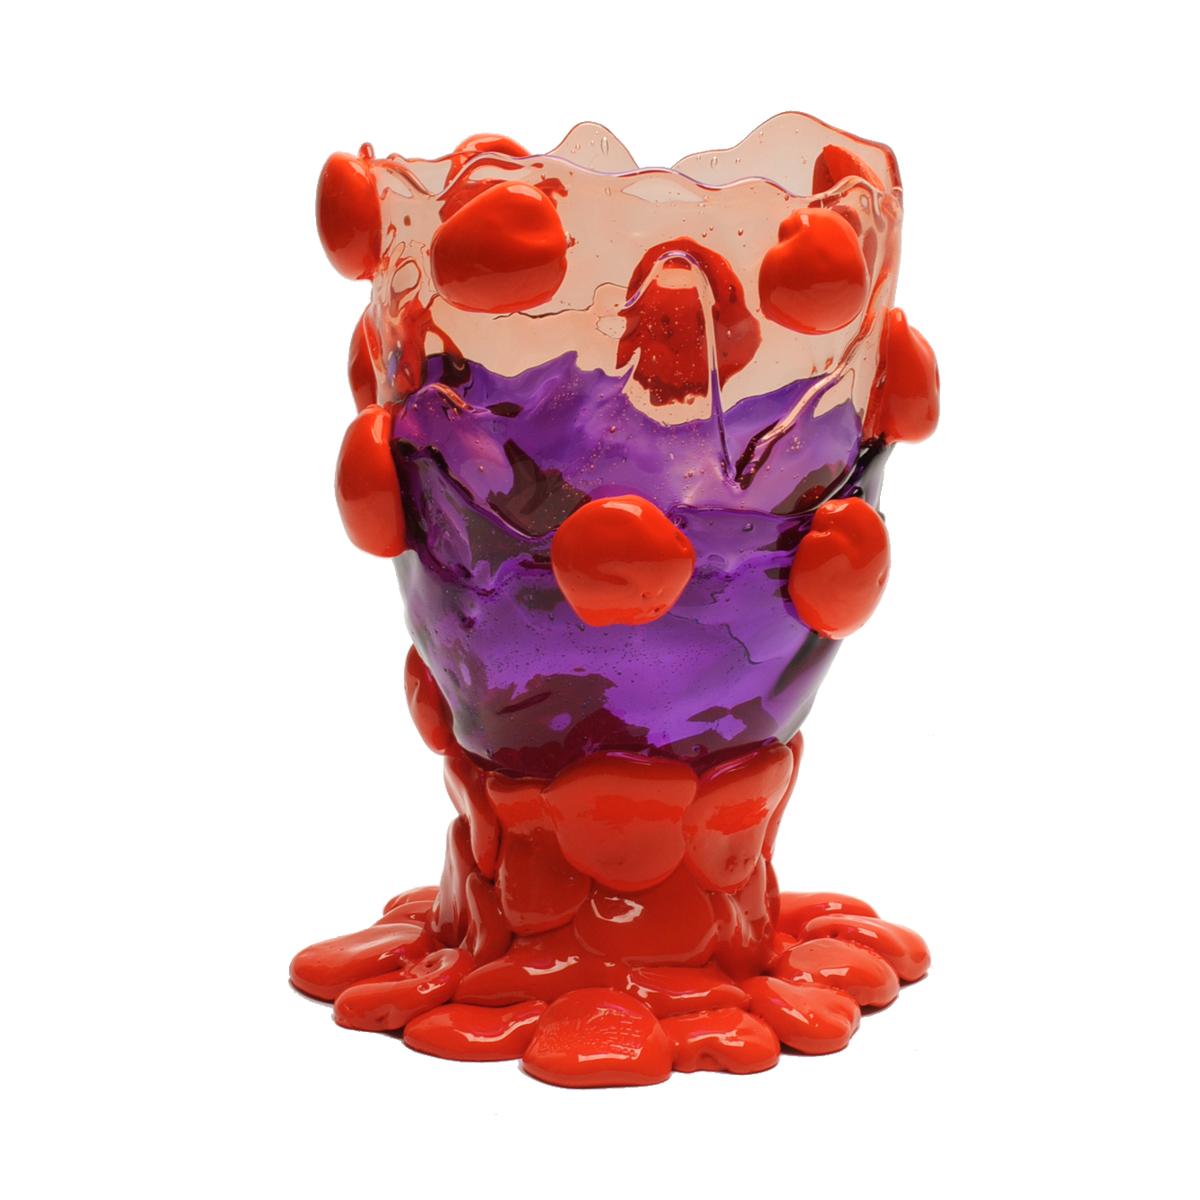 Nugget vase, clear light ruby, clear purple, matt orange.
Vase in soft resin designed by Gaetano Pesce in 1995 for Fish Design collection.

Measures: M - ø 16cm x H 26cm
Colours: clear light ruby, clear purple, matt orange
Other sizes